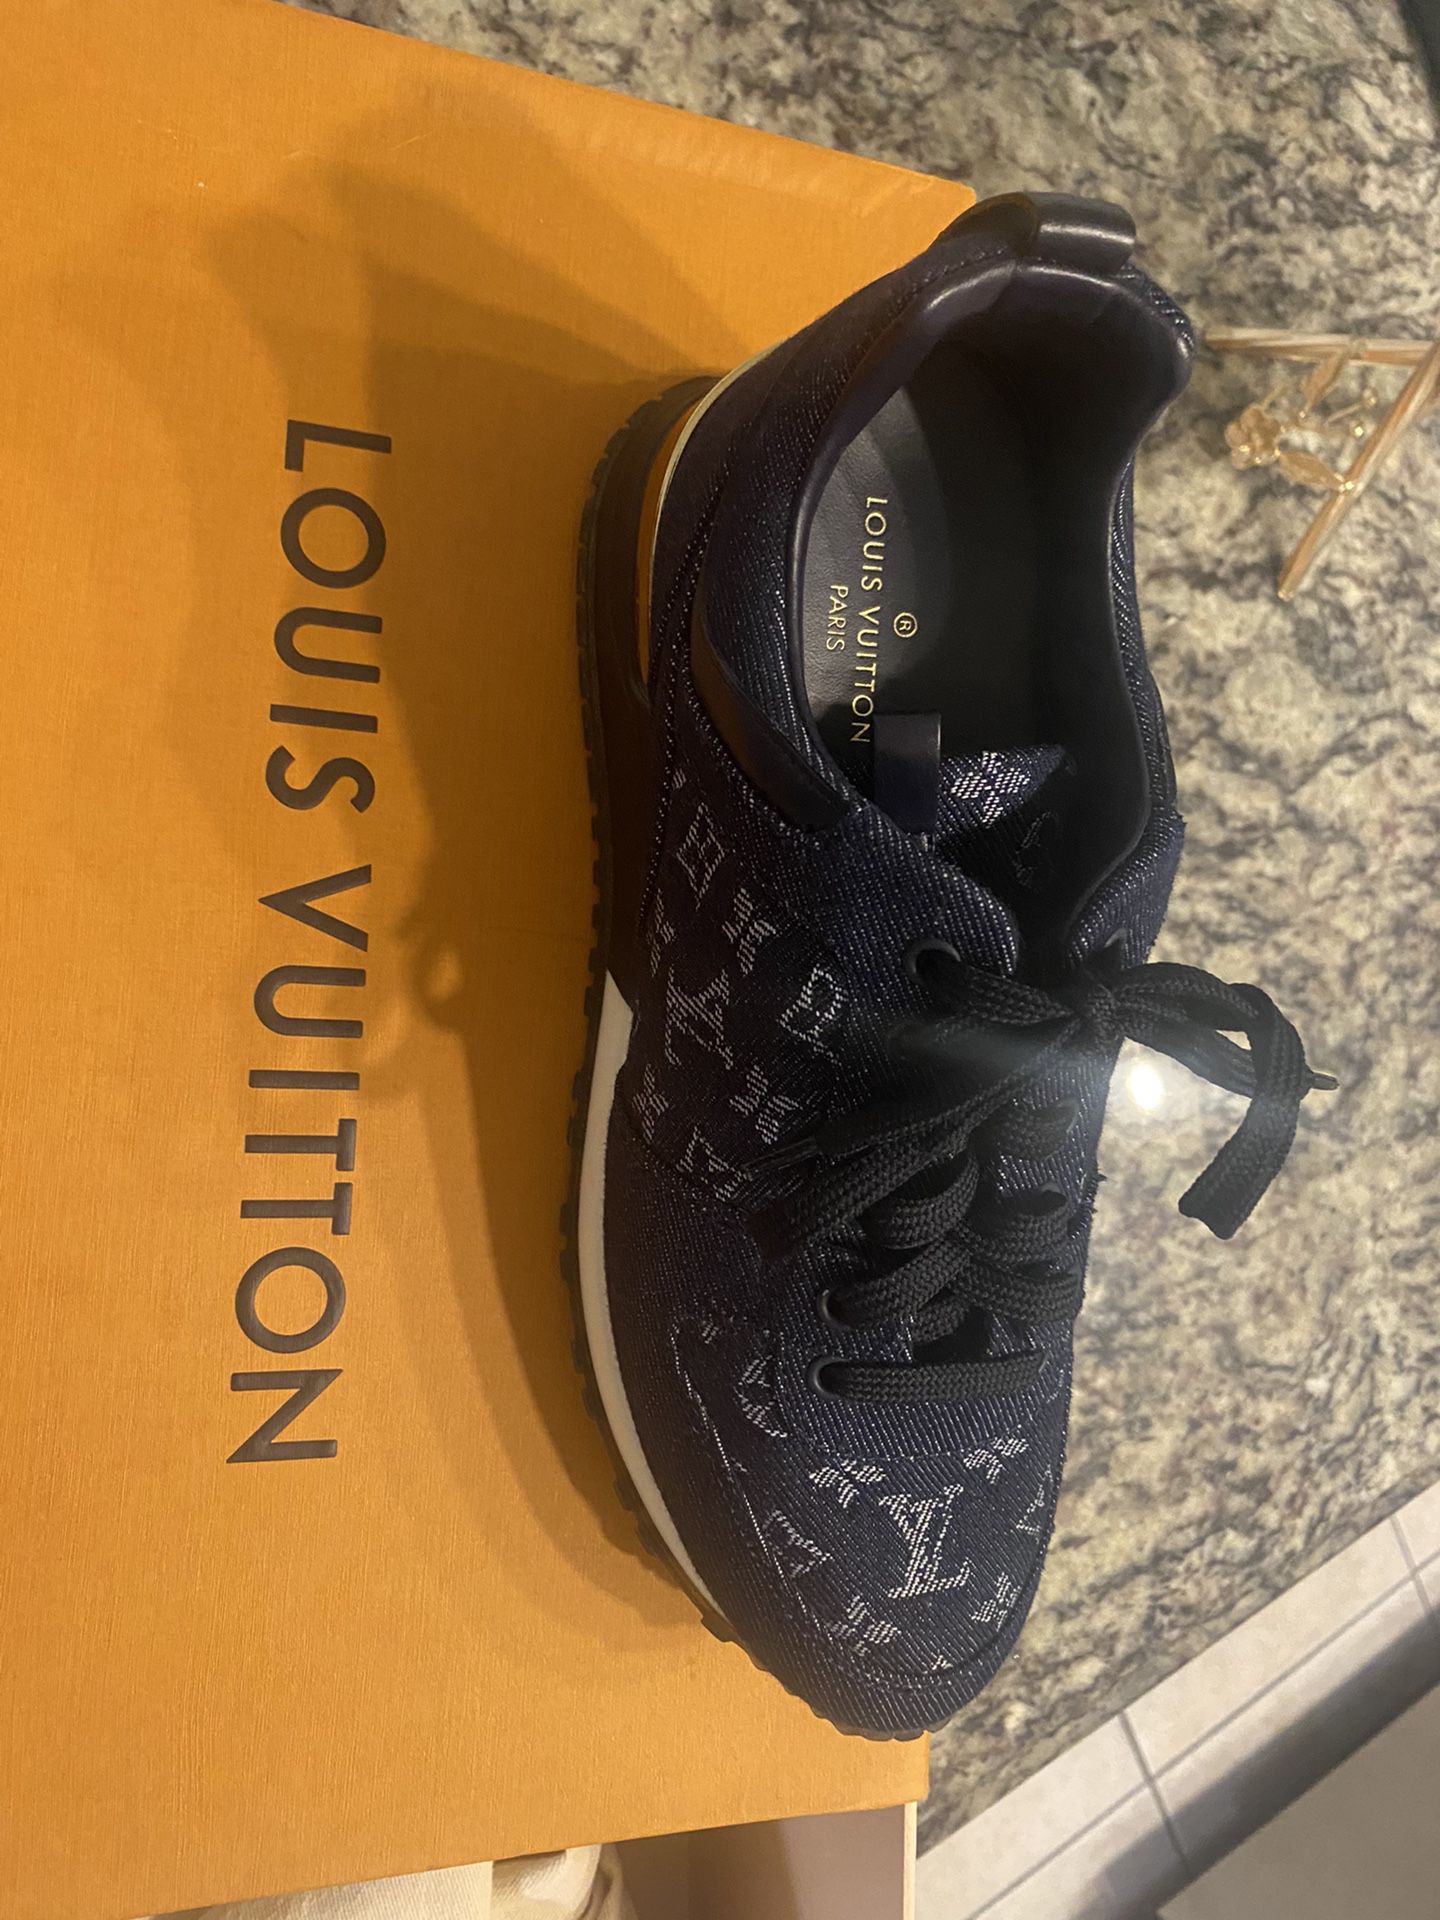 Women Shoes Louis Vuitton Size 7 for Sale in Lake Worth, FL